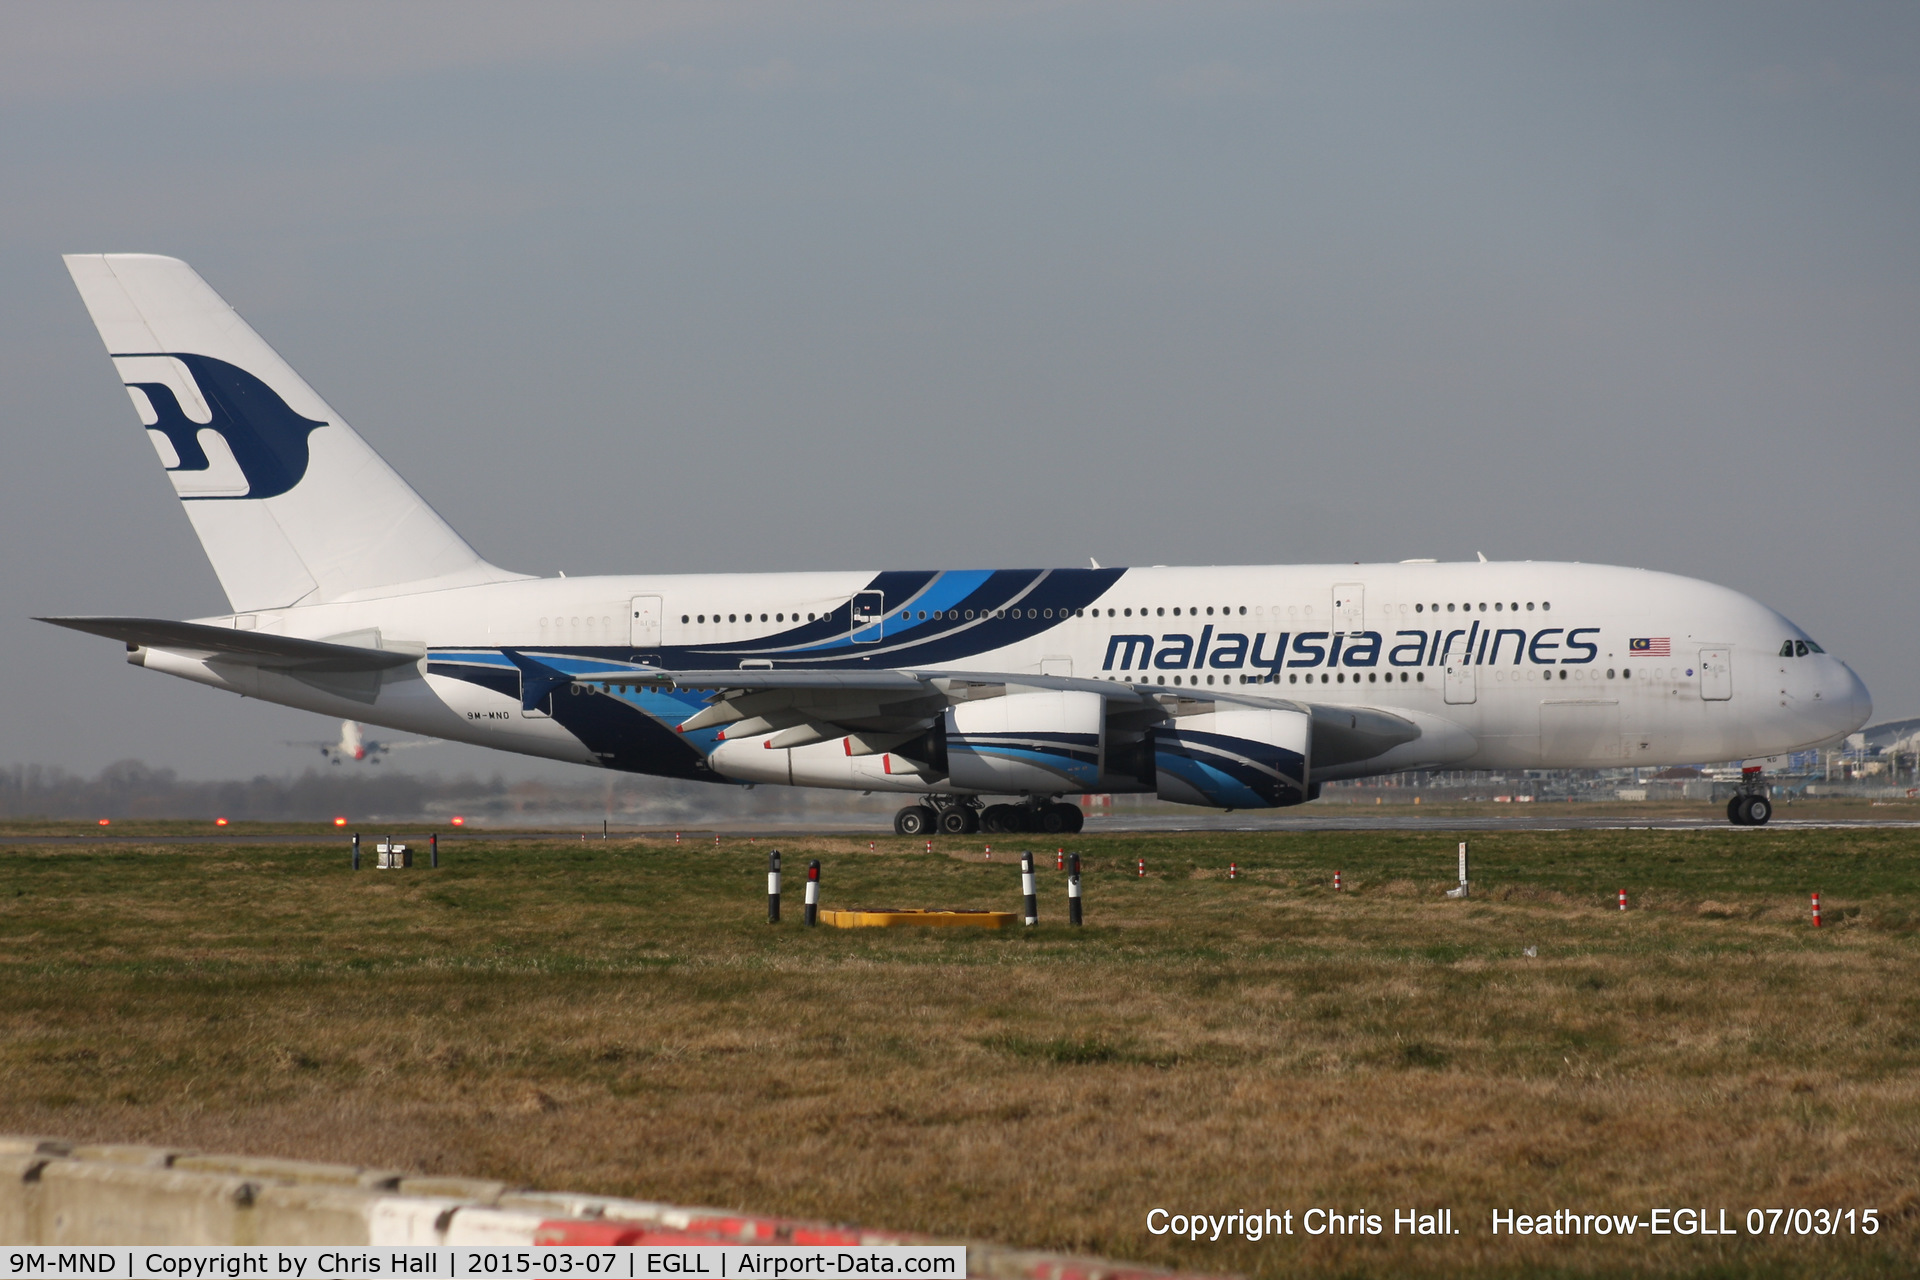 9M-MND, 2012 Airbus A380-841 C/N 089, Malaysia Airlines